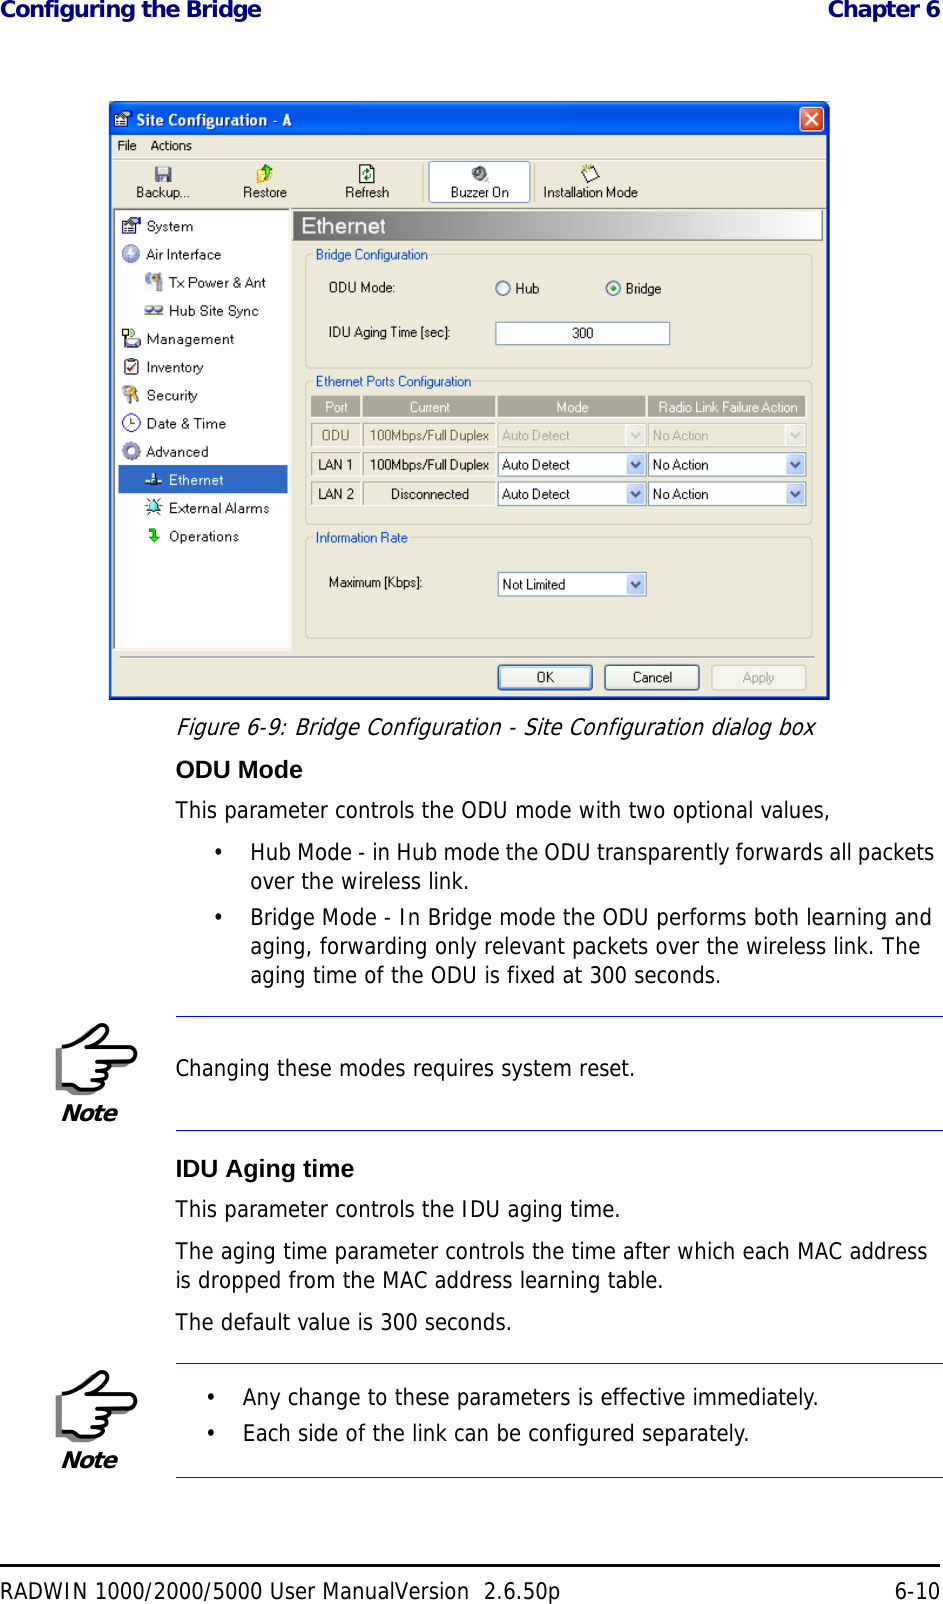 Configuring the Bridge  Chapter 6RADWIN 1000/2000/5000 User ManualVersion  2.6.50p 6-10Figure 6-9: Bridge Configuration - Site Configuration dialog boxODU ModeThis parameter controls the ODU mode with two optional values, • Hub Mode - in Hub mode the ODU transparently forwards all packets over the wireless link.• Bridge Mode - In Bridge mode the ODU performs both learning and aging, forwarding only relevant packets over the wireless link. The aging time of the ODU is fixed at 300 seconds.IDU Aging timeThis parameter controls the IDU aging time.The aging time parameter controls the time after which each MAC address is dropped from the MAC address learning table.The default value is 300 seconds.NoteChanging these modes requires system reset.Note• Any change to these parameters is effective immediately.• Each side of the link can be configured separately.